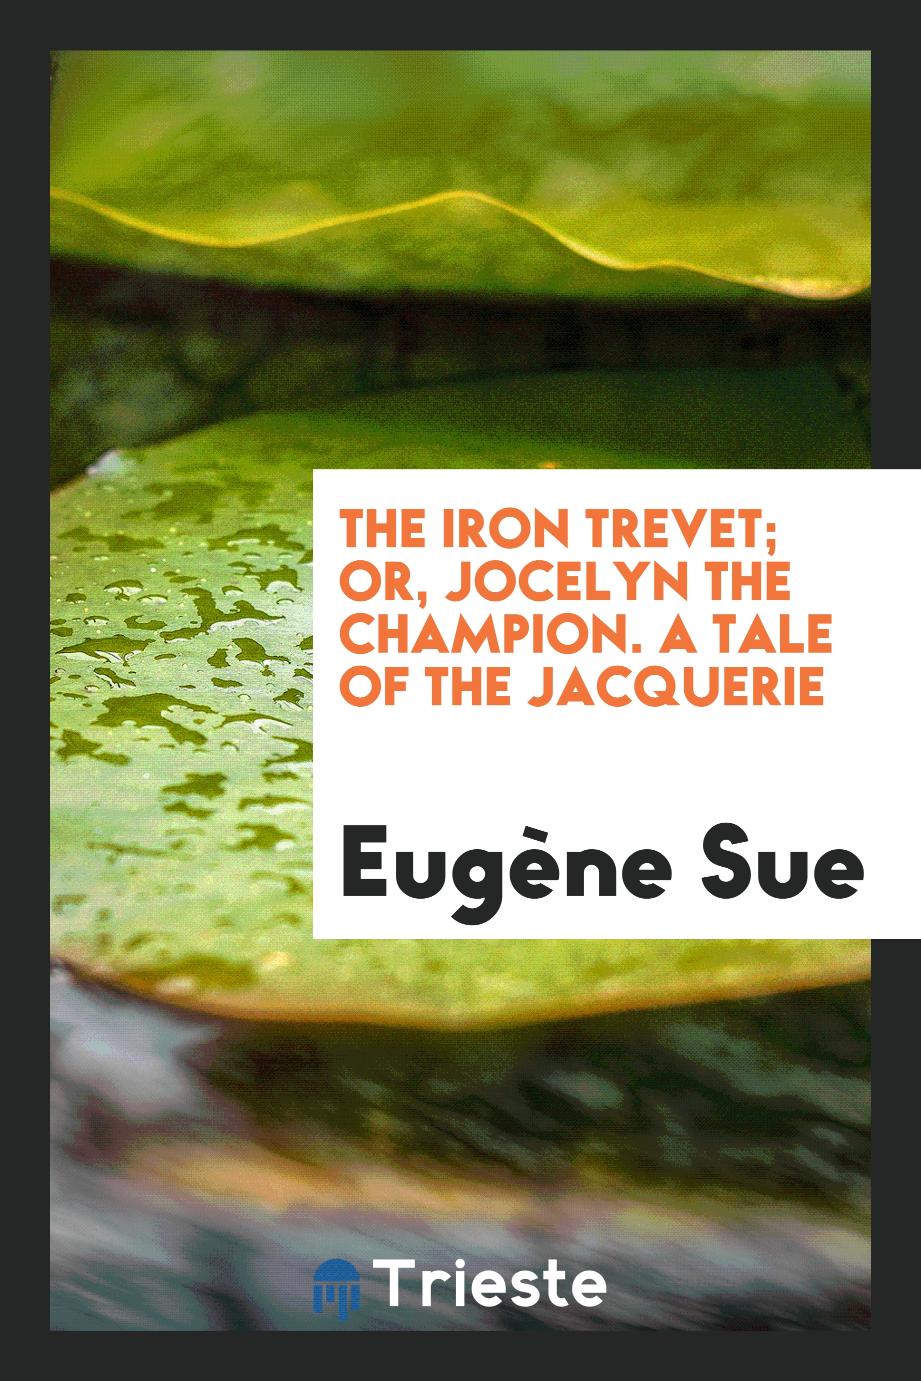 The iron trevet; or, Jocelyn the champion. A tale of the Jacquerie